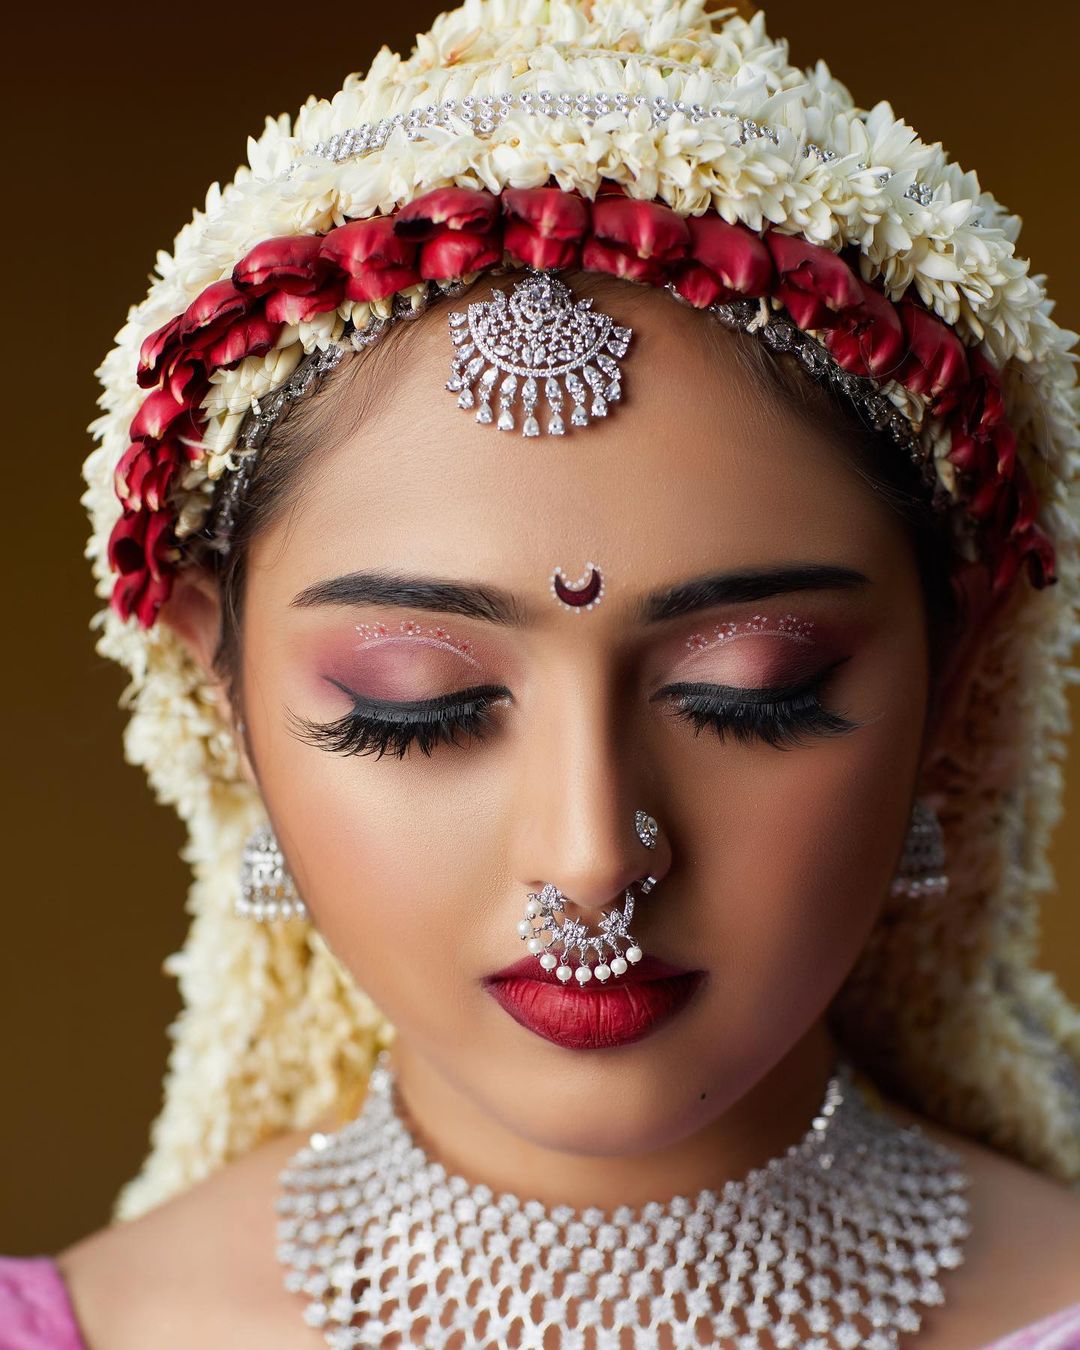 south indian brides